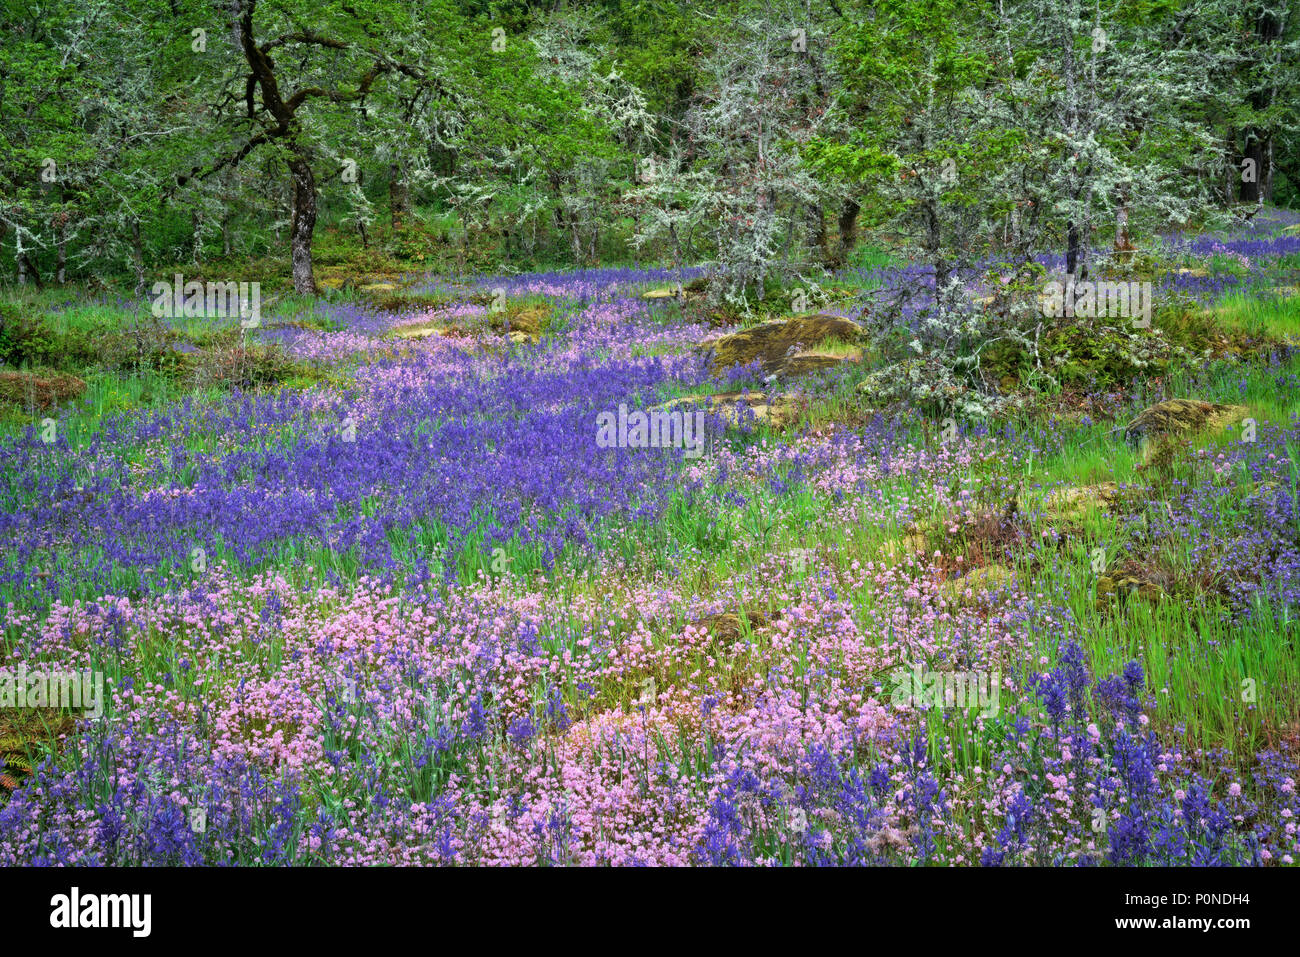 Rosy plectritis and purple camas lily highlight the spring bloom in Oregon’s Camassia Natural Area and Clackamas County. Stock Photo